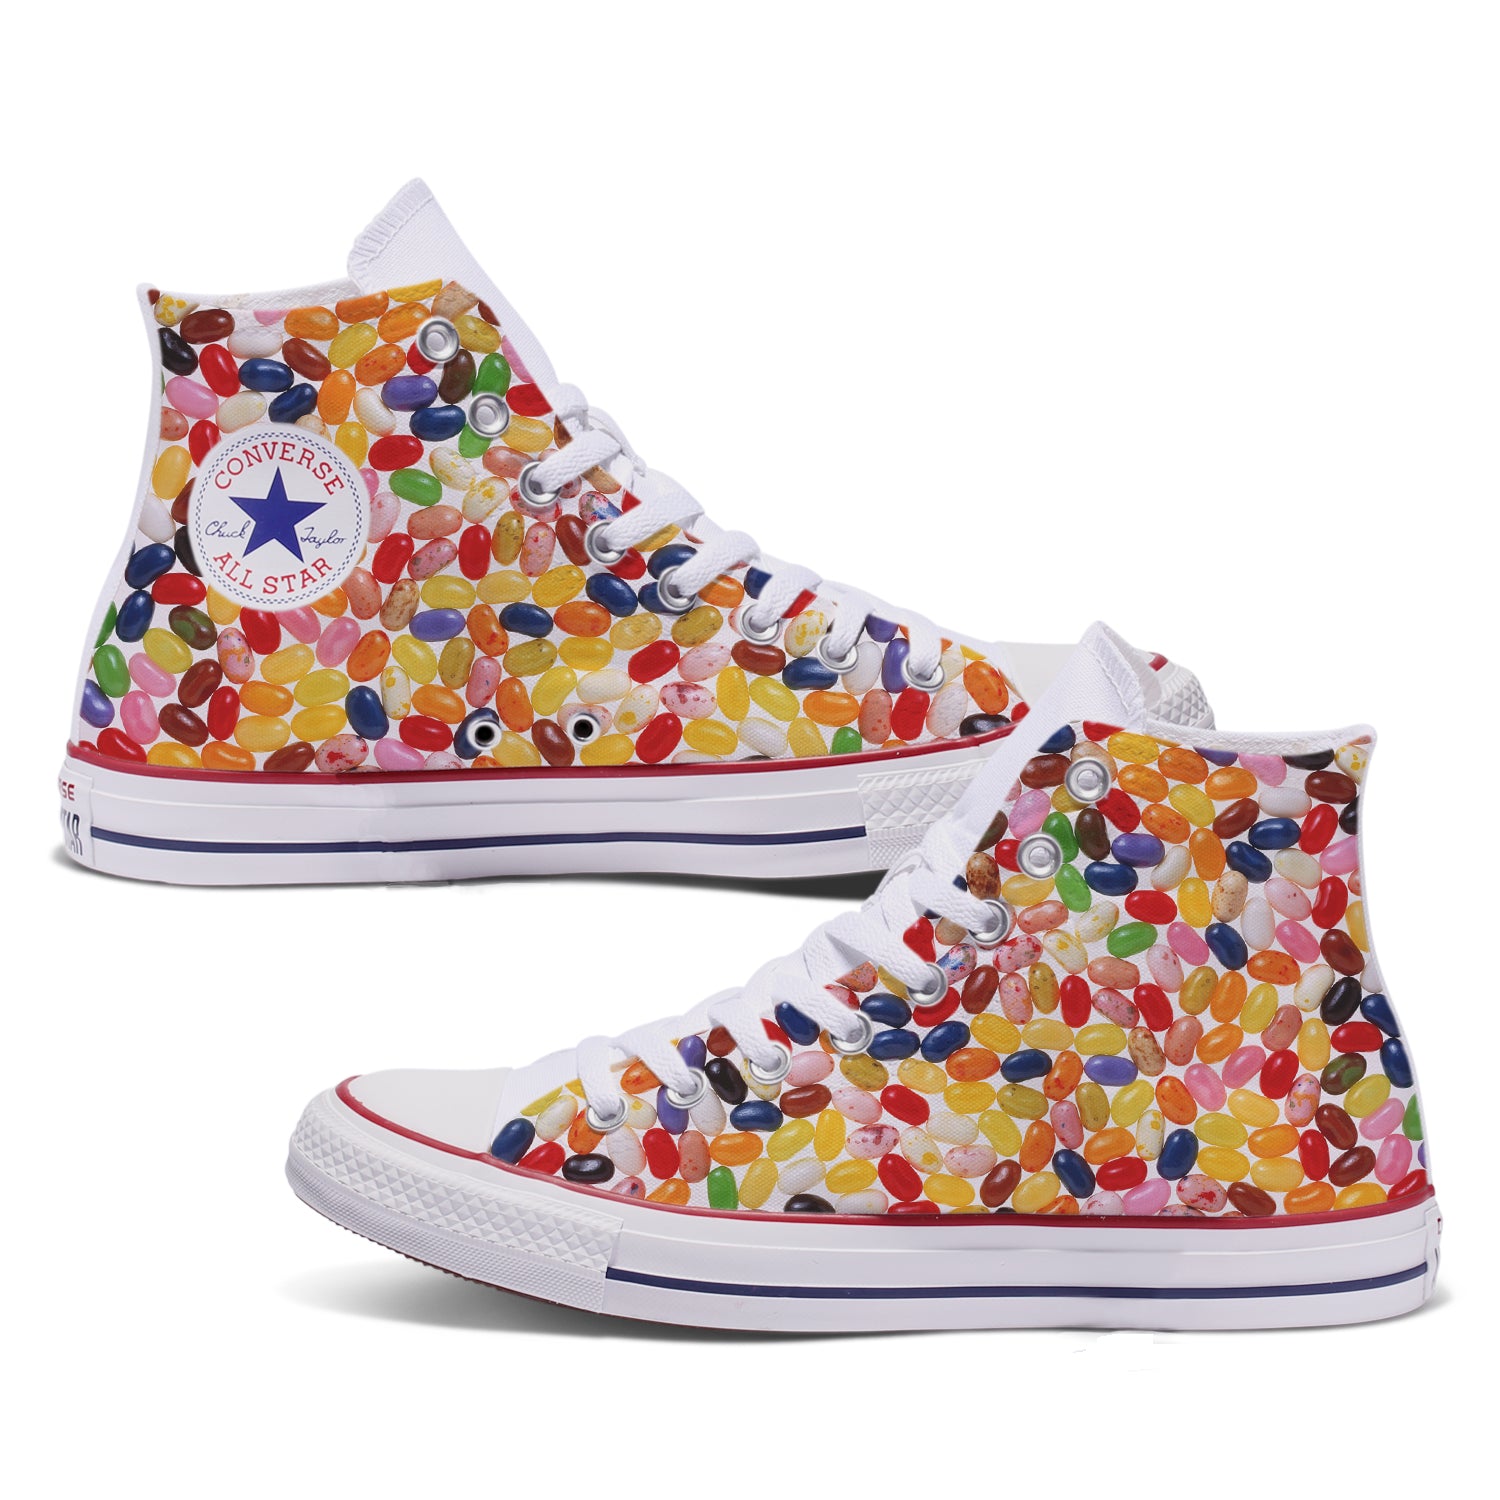 37 Sports Converse jelly shoes for Women